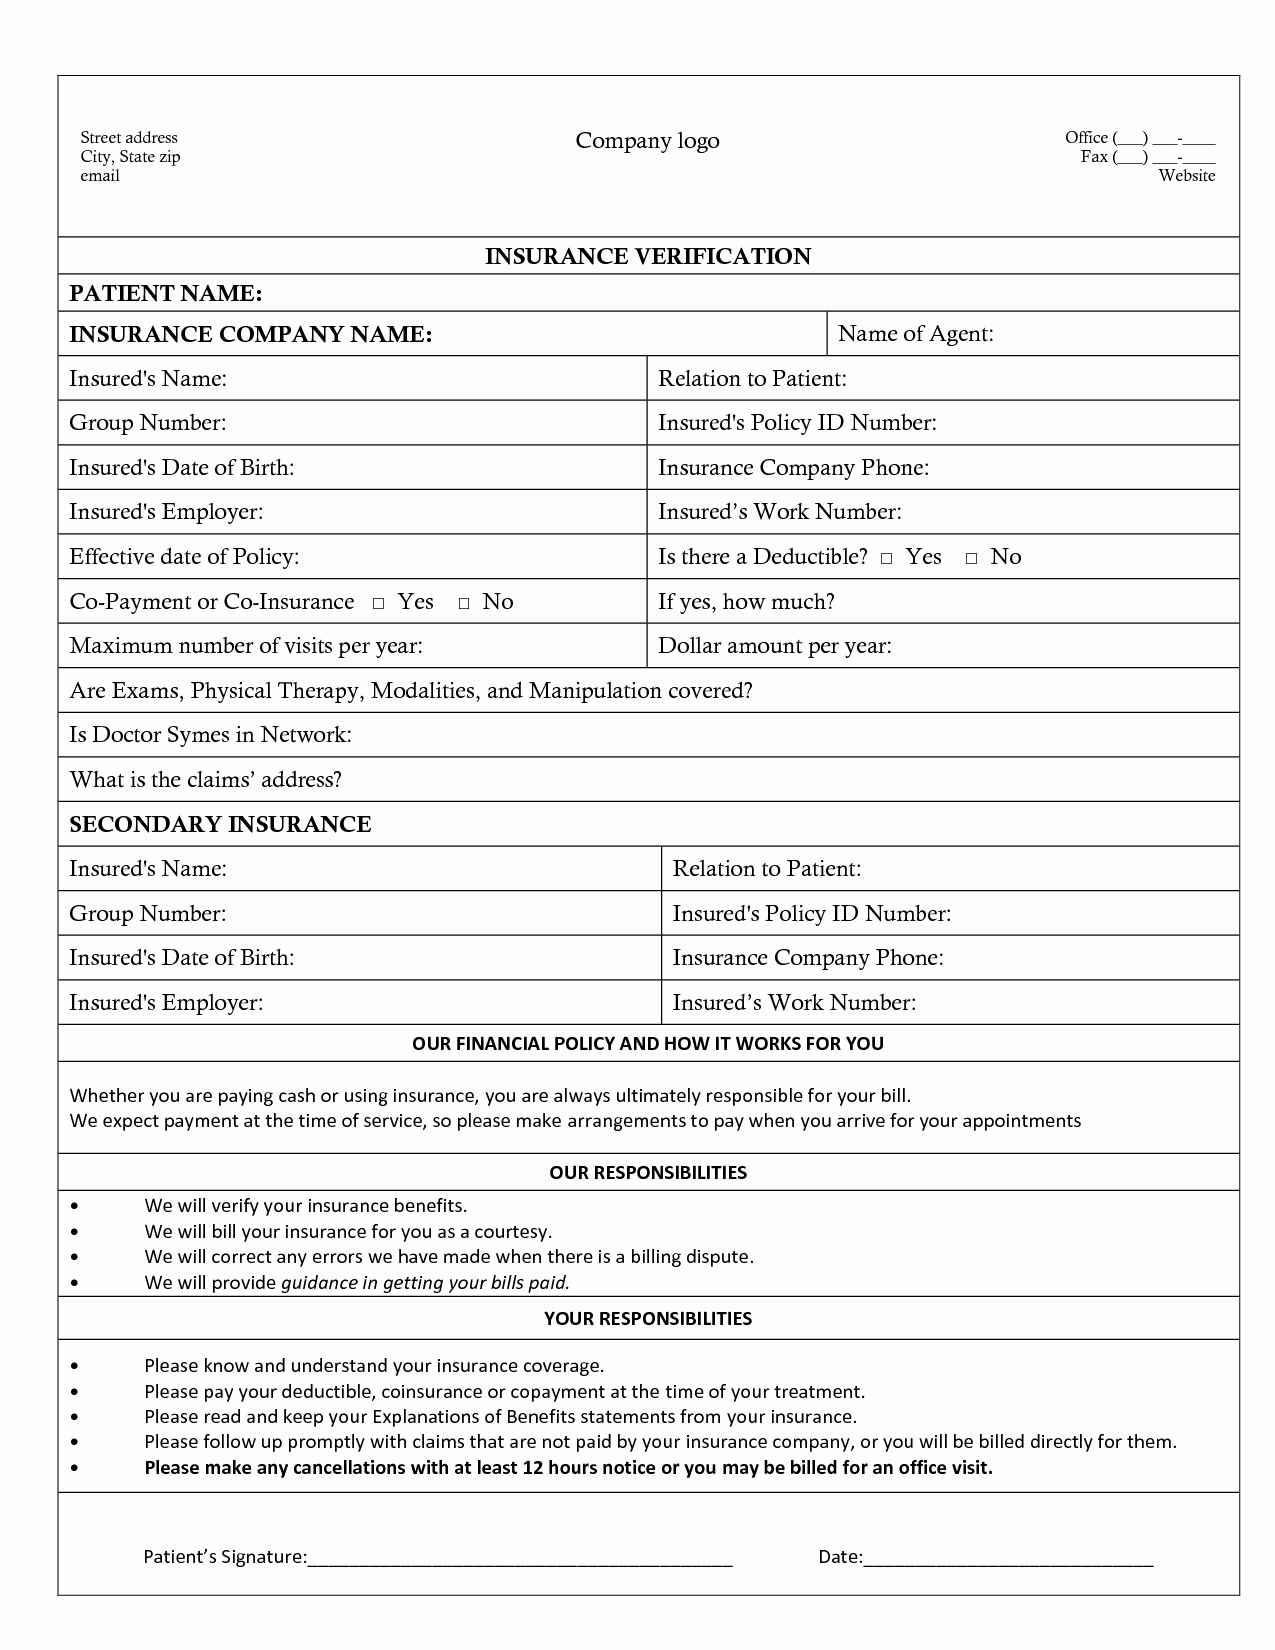 Proof Of Insurance Template New Medical Insurance Verification form Template – Templates